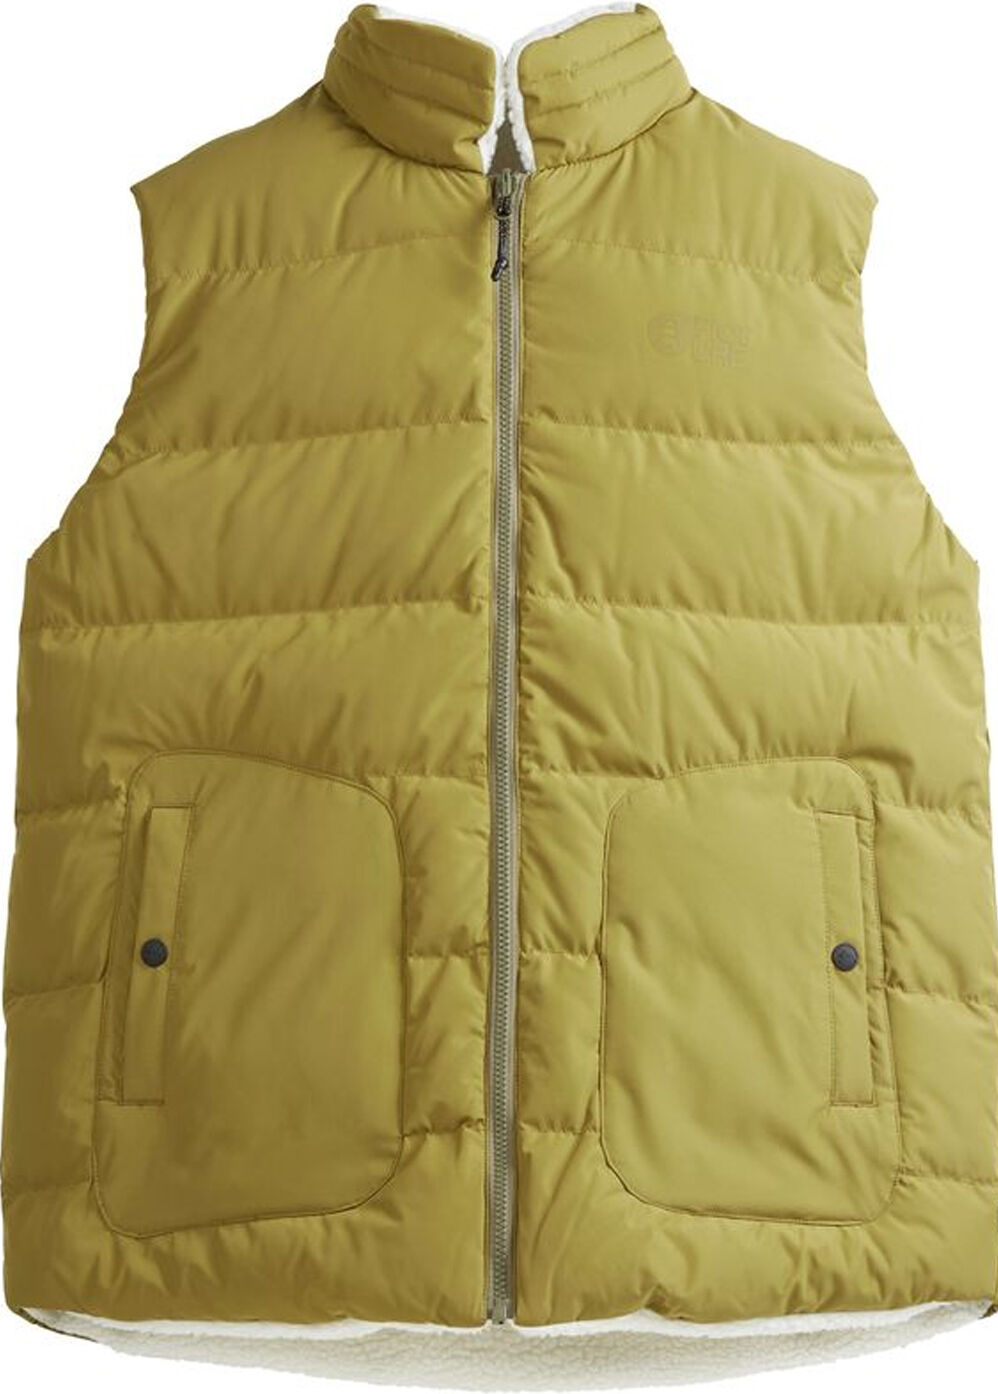 PICTURE RUSSELLO VEST ARMY GREEN XL